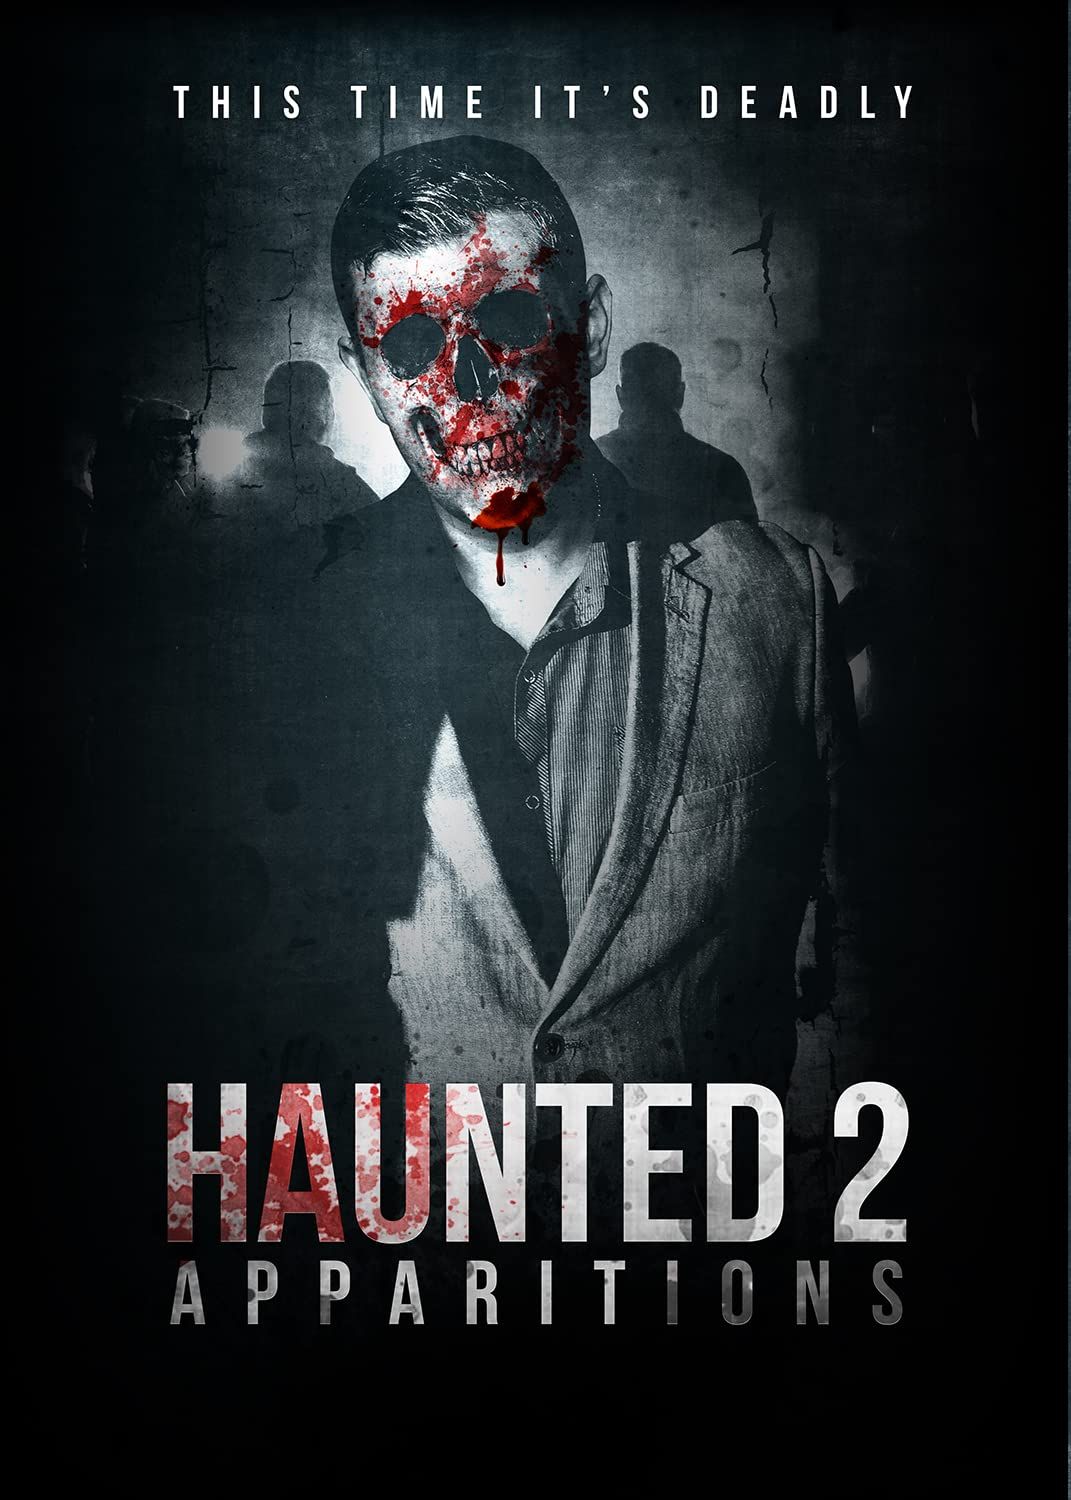 Haunted 2 Apparitions (2018) Hindi Dubbed HDRip download full movie